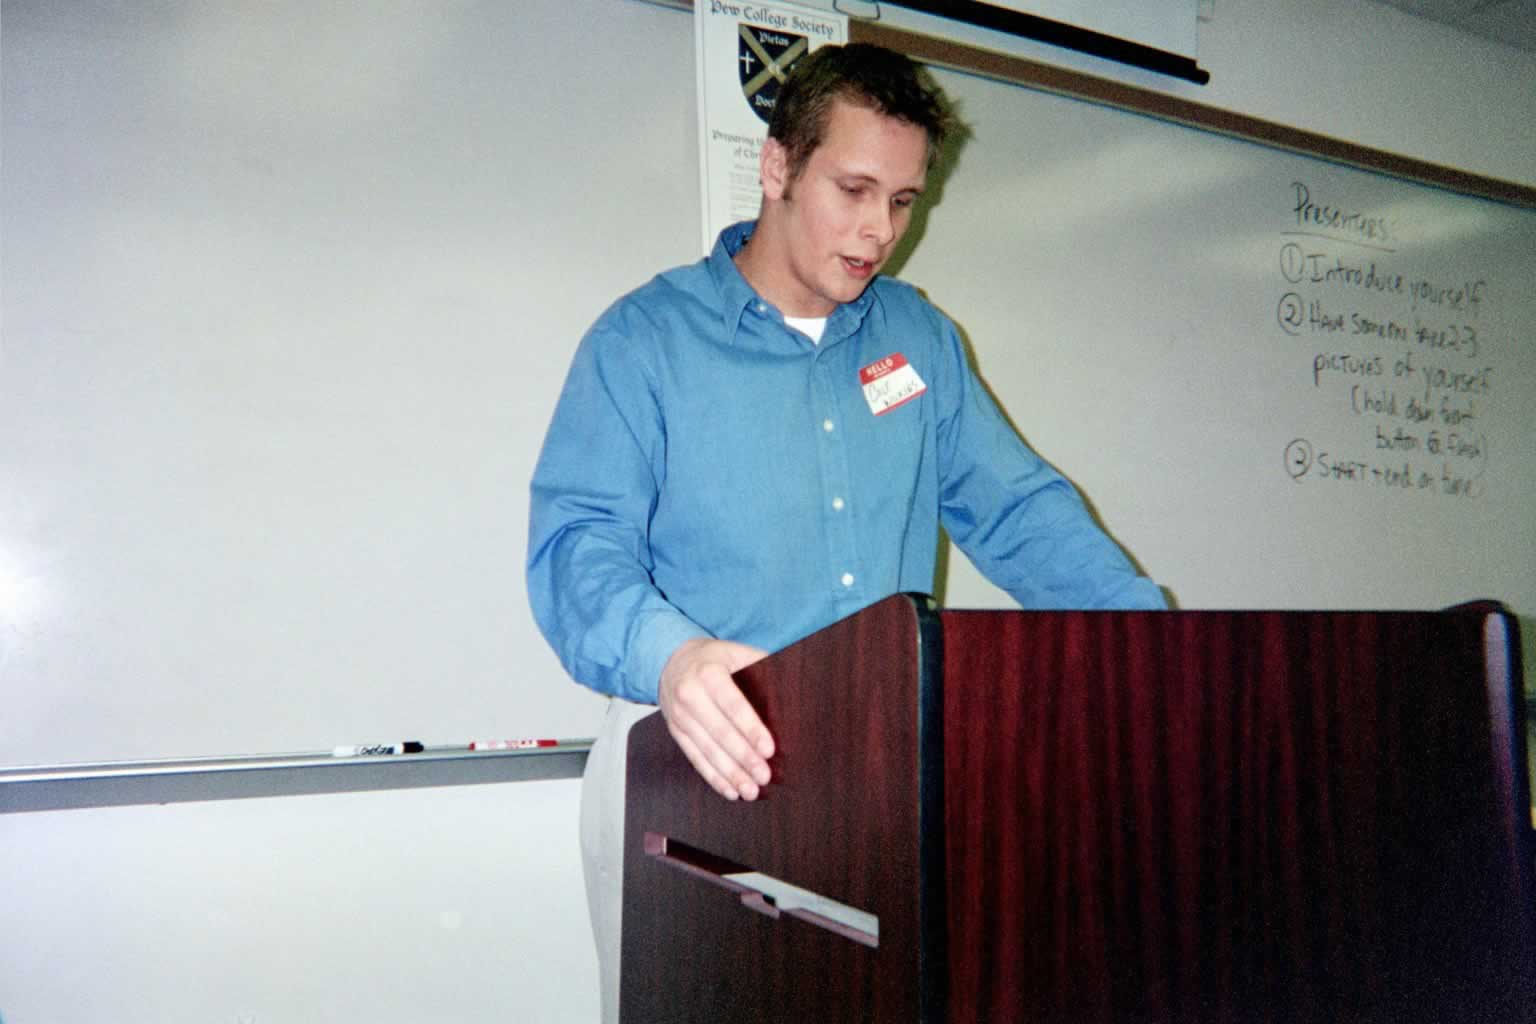 picture of a man in a blue shirt standing behind a podium in a classroom